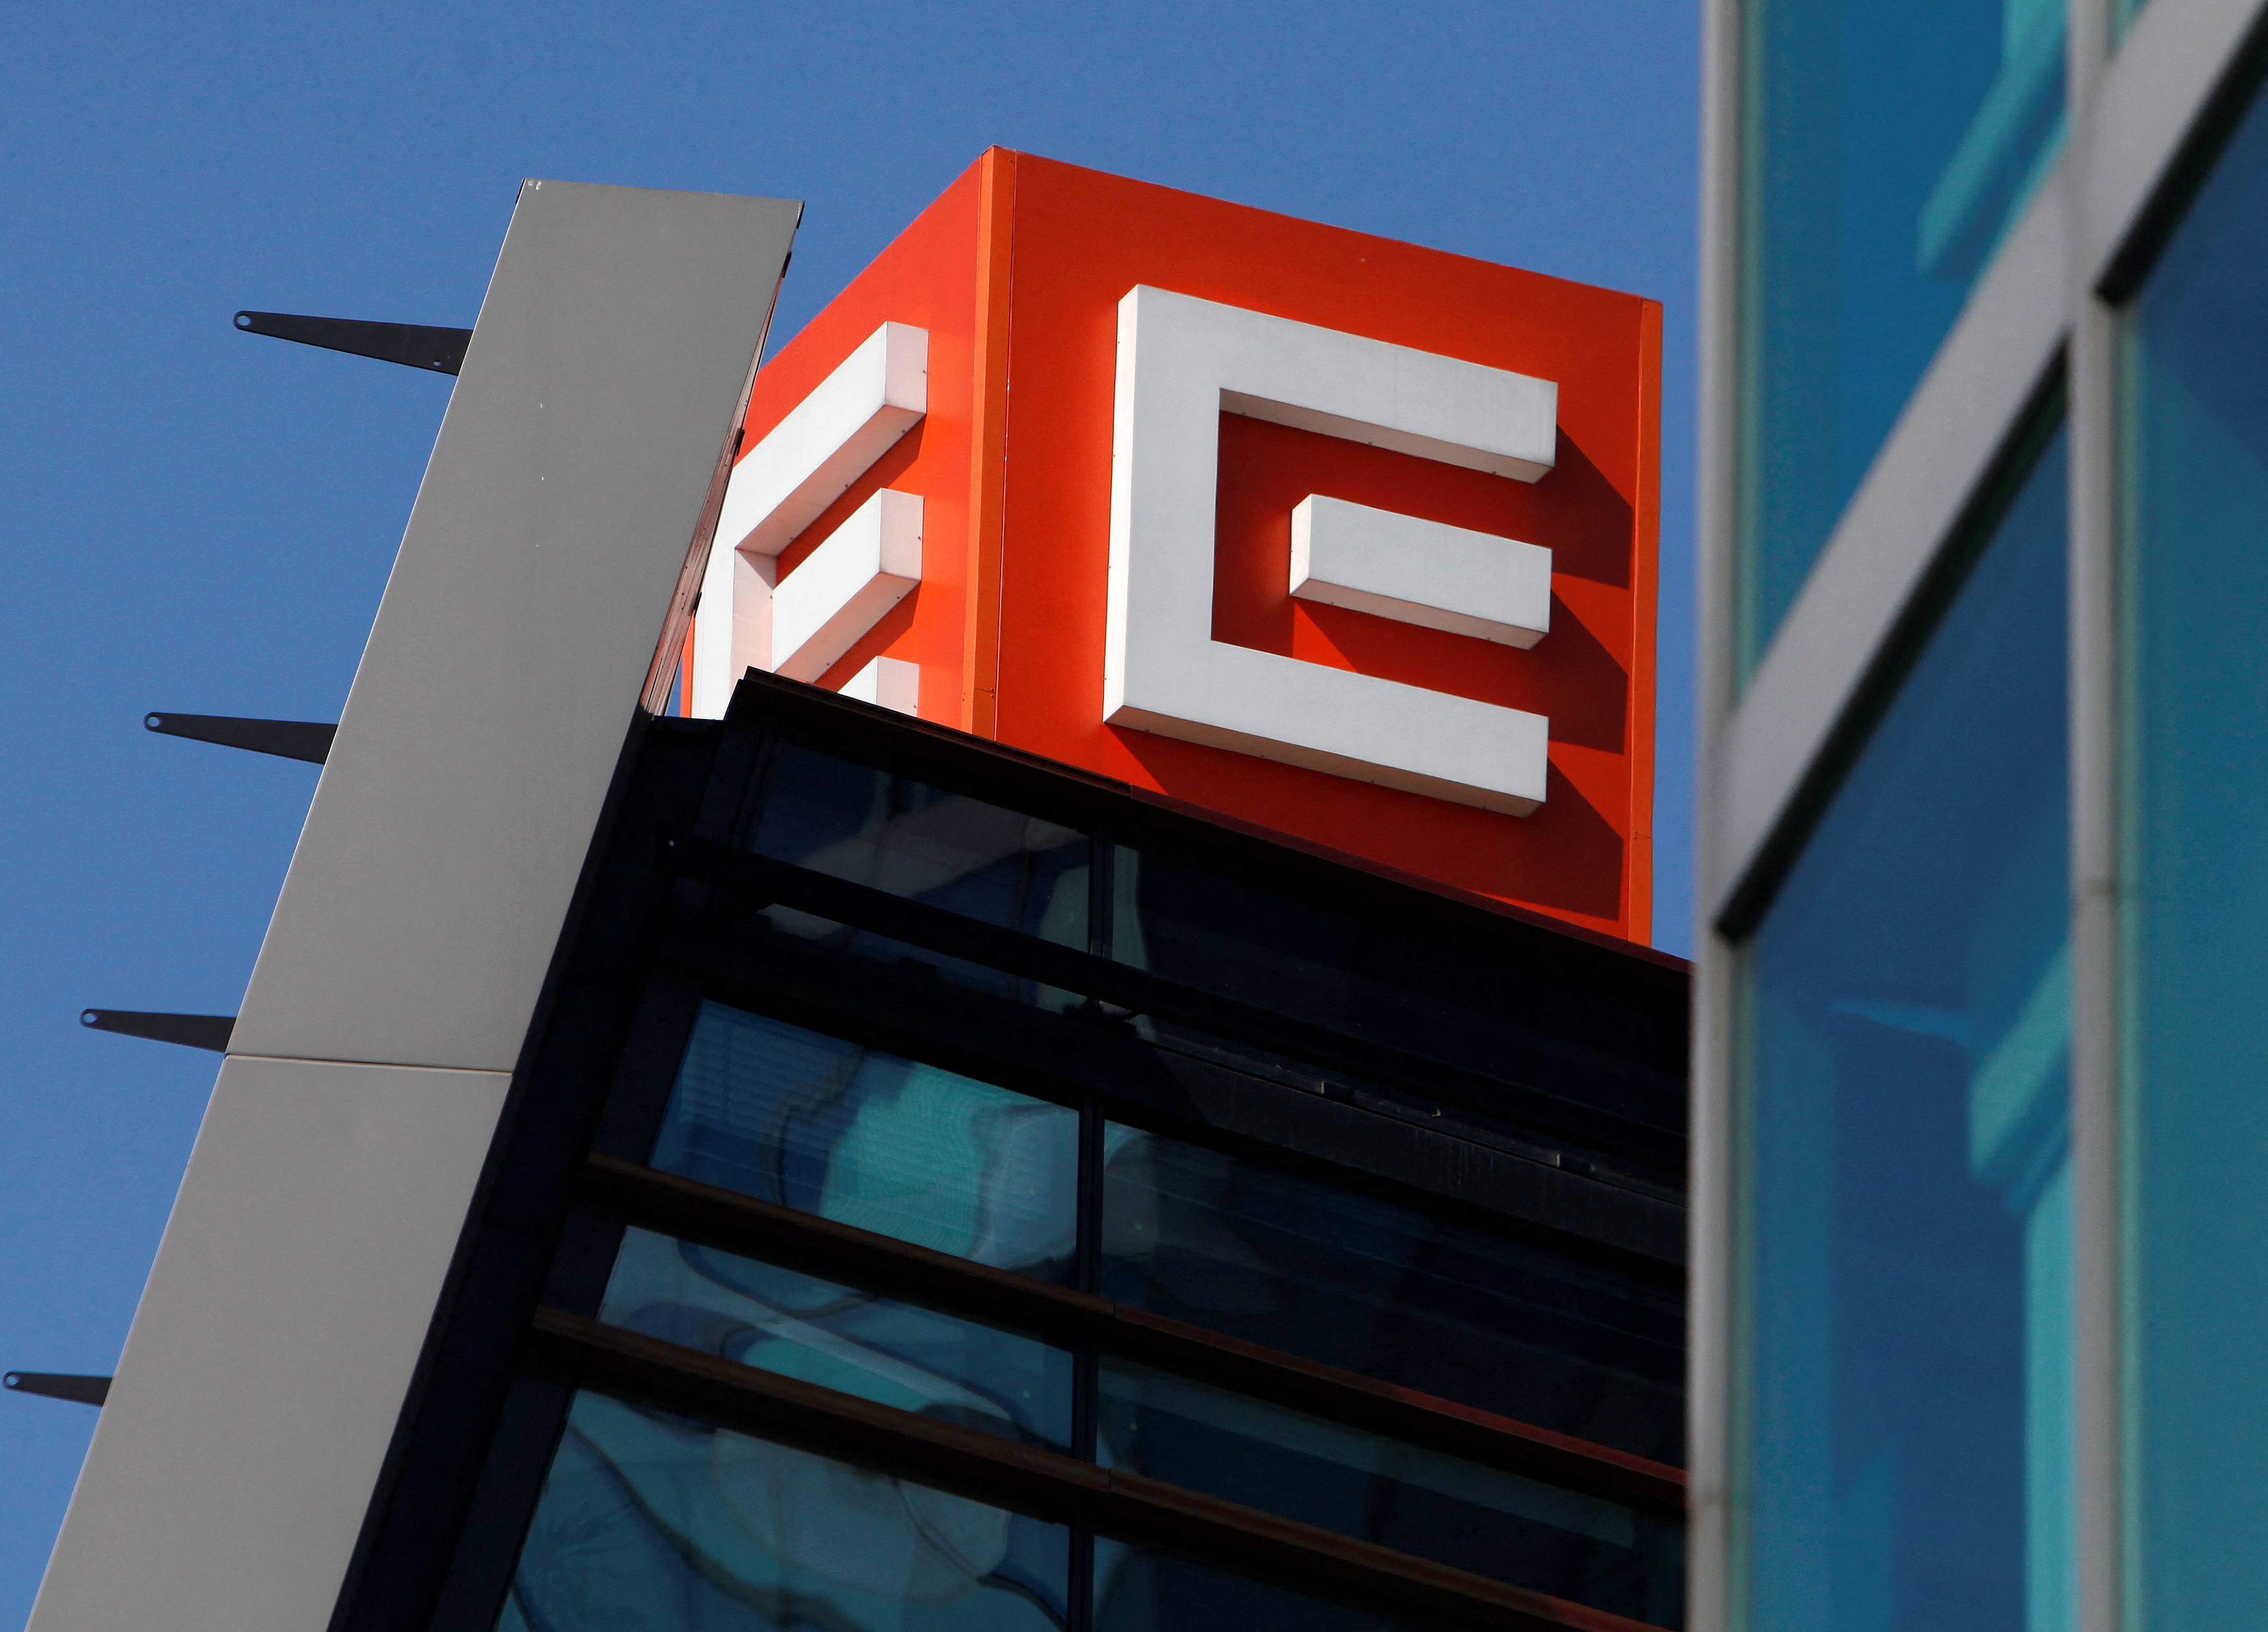 Czech electricity producer CEZ's logo is seen on the company's headquarters in Prague